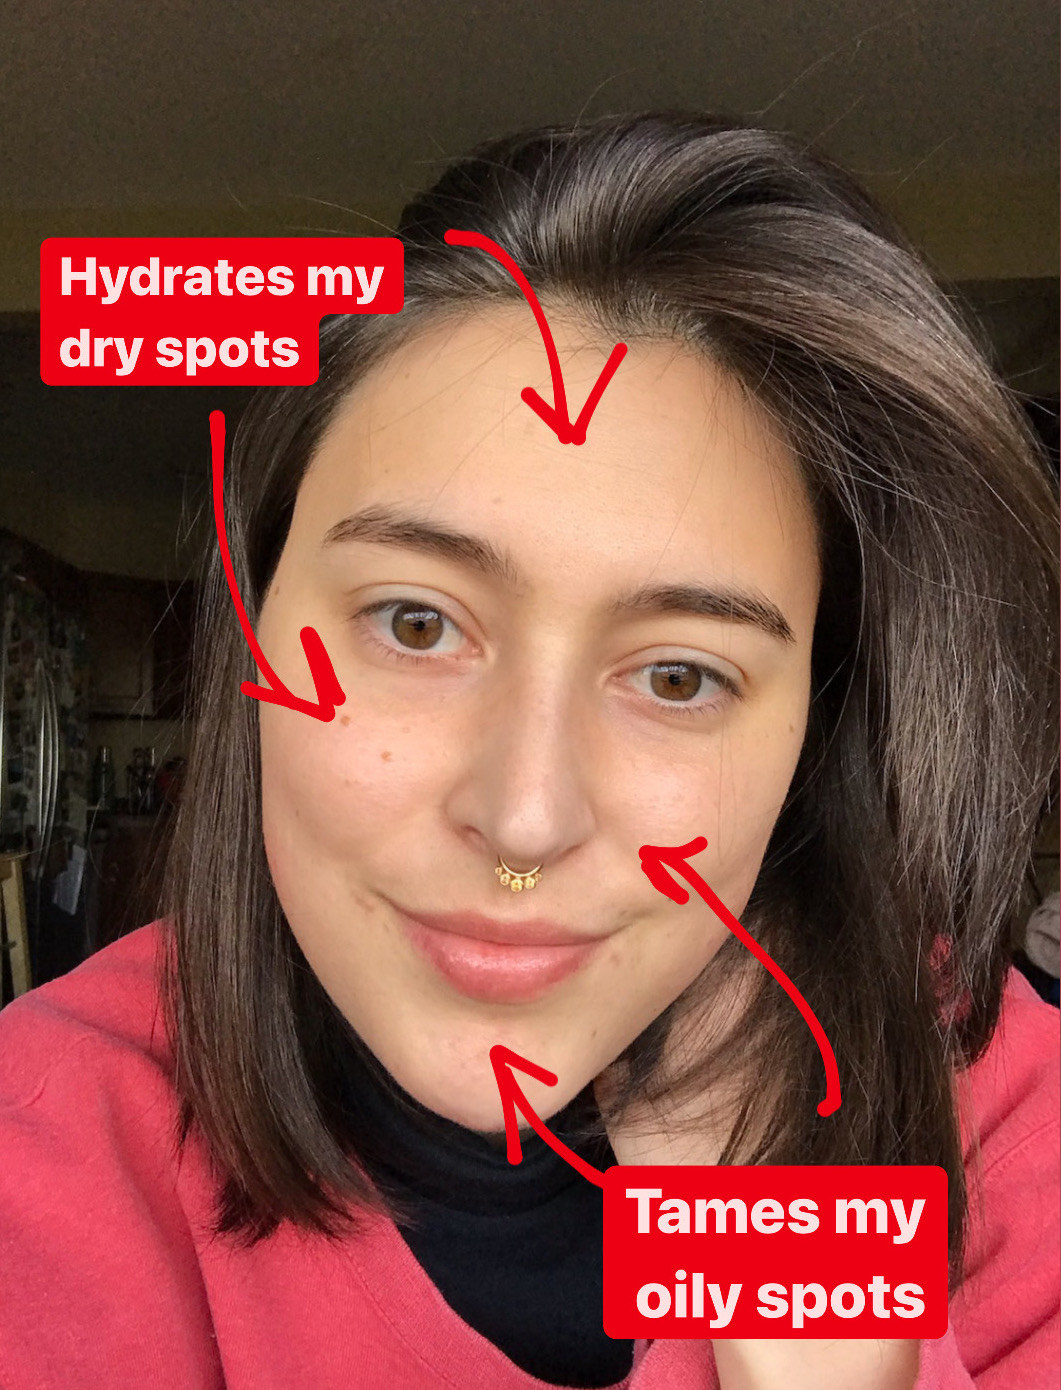 the writer&#x27;s face captioned &quot;hydrates my dry spots&quot; with arrows pointed to her forehead and cheeks and &quot;tames oily spots&quot; with arrows pointing to her nose crease and chin